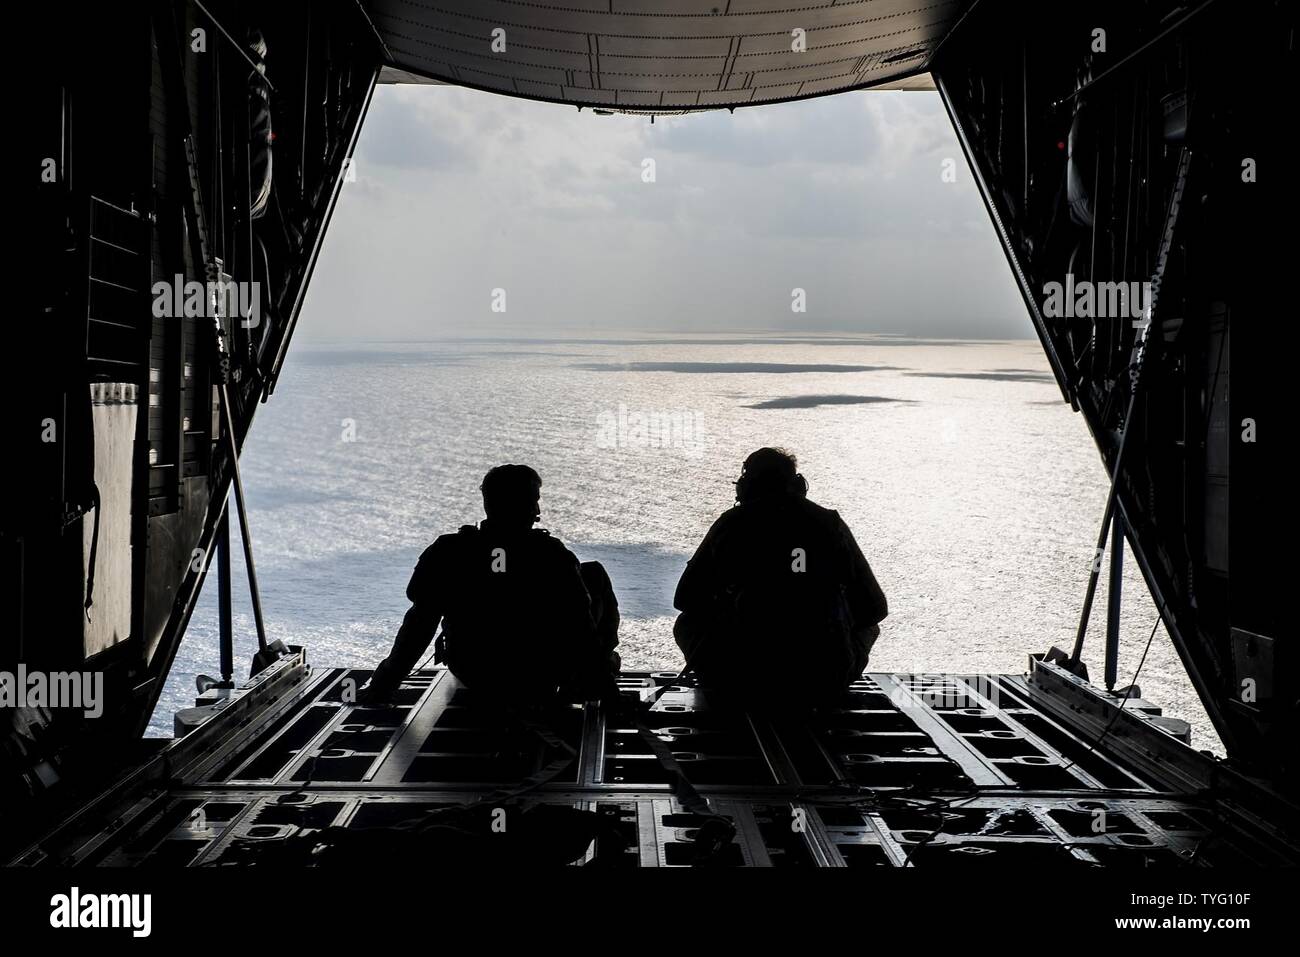 Senior Airman Timothy Manzer and Staff Sgt. Korey King, 17th Special Operations Squadron loadmasters, look out over the ocean after refueling HH-60 Pave Hawks from 33rd Rescue Squadron and Japan Air Self-Defense Force during exercise Keen Sword 17, Nov. 7, 2016, near Okinawa, Japan. For more than 50 years, the U.S.-Japan Alliance has been the foundation of peace and security in Northeast Asia and the cornerstone of U.S. engagement in the region. In 1960, Japan and the U.S. signed the Treaty of Mutual Cooperation and Security. The alliance plays an indispensable role in ensuring the security an Stock Photo